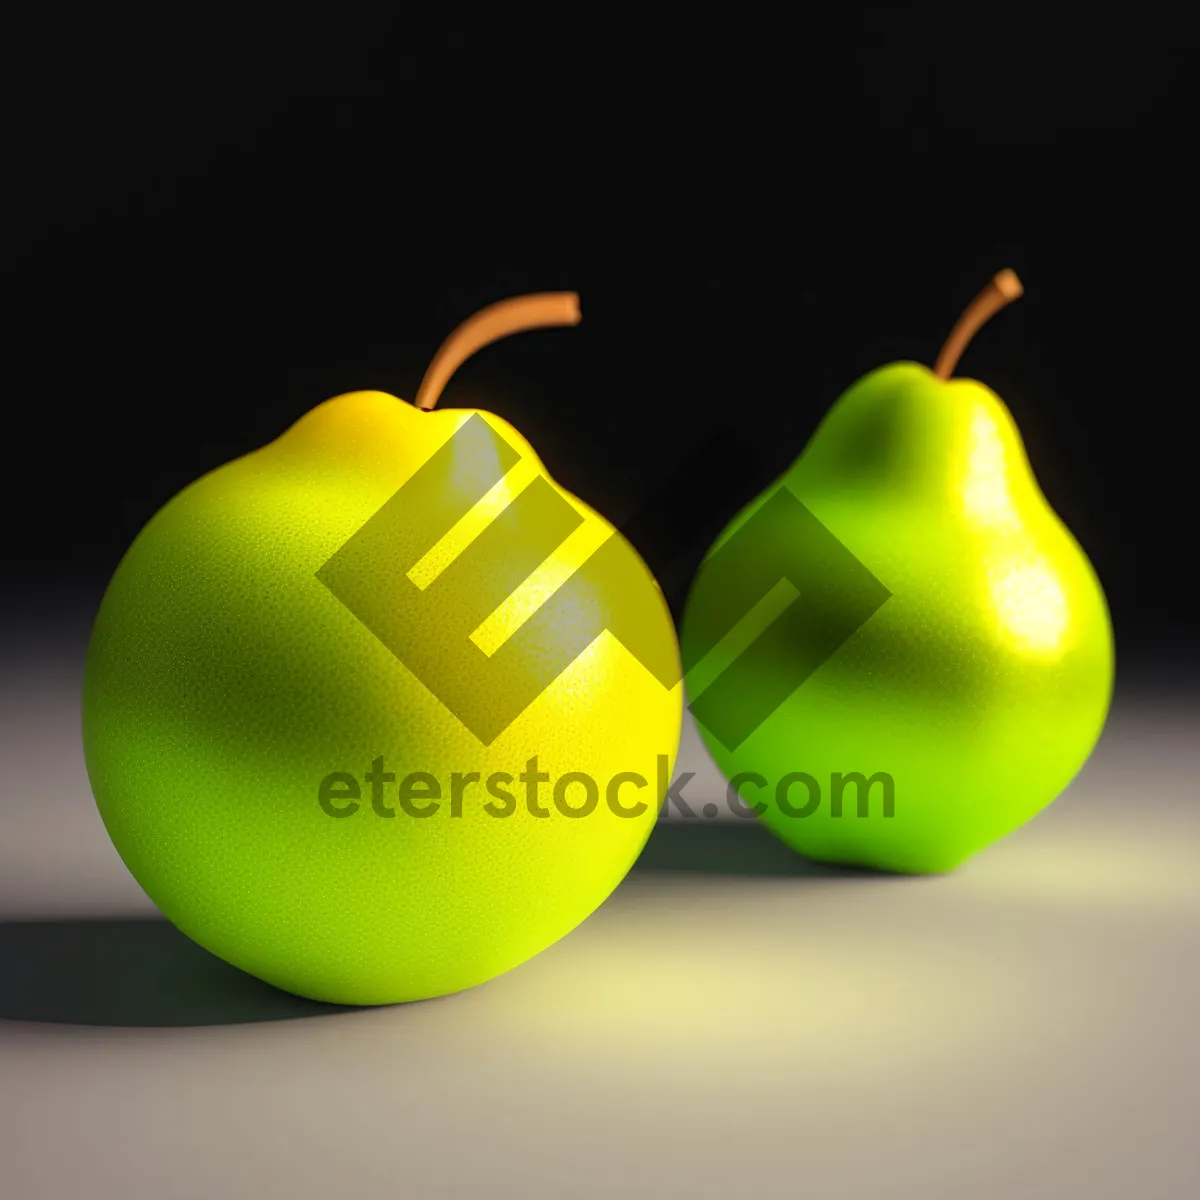 Picture of Fresh and Juicy Yellow Apples for a Healthy Snack